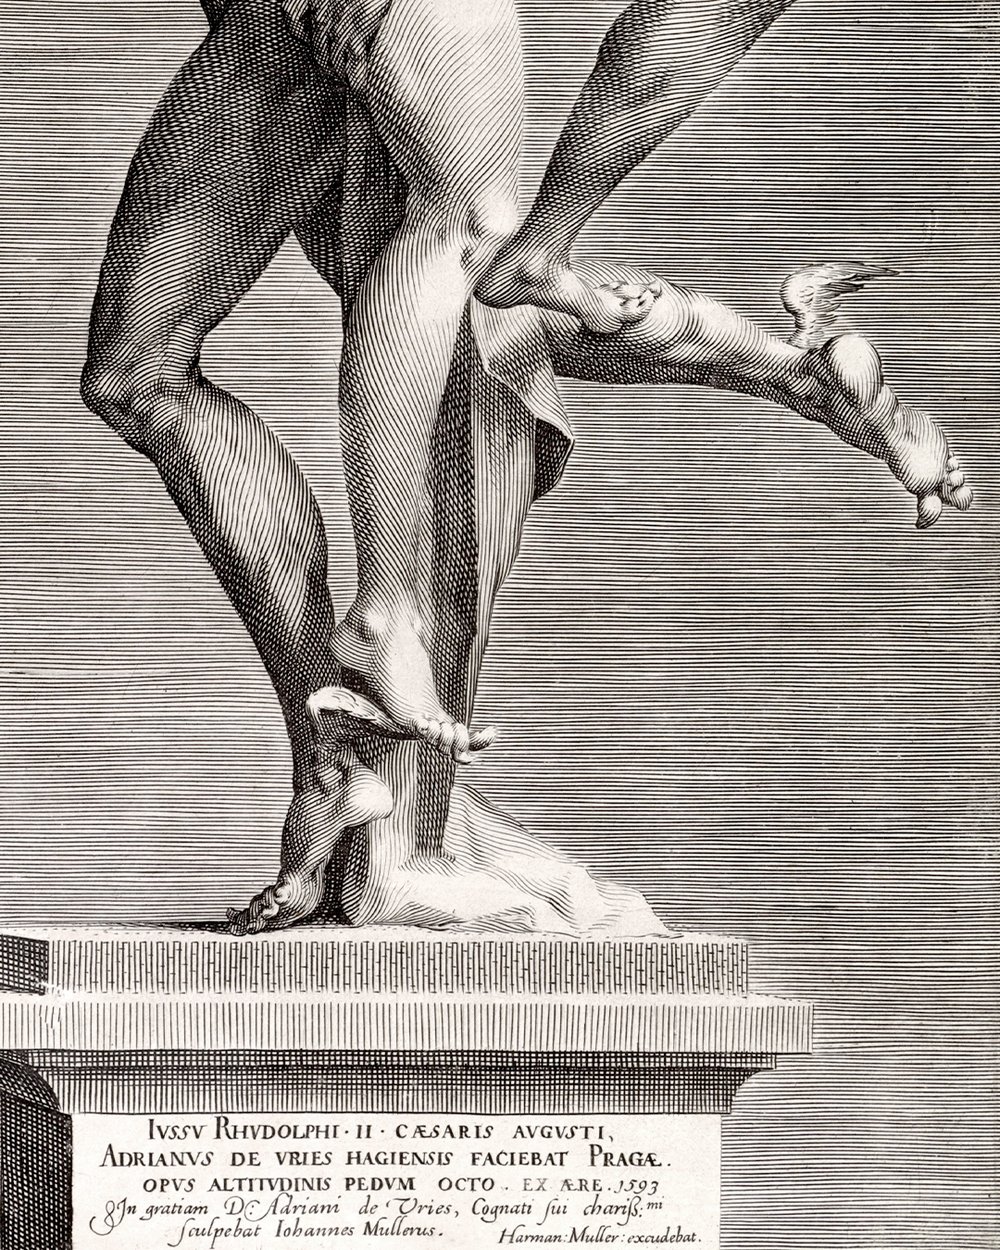 ''Mercury and Psyche, side view with Psyche's side'' (1595 - 1599)